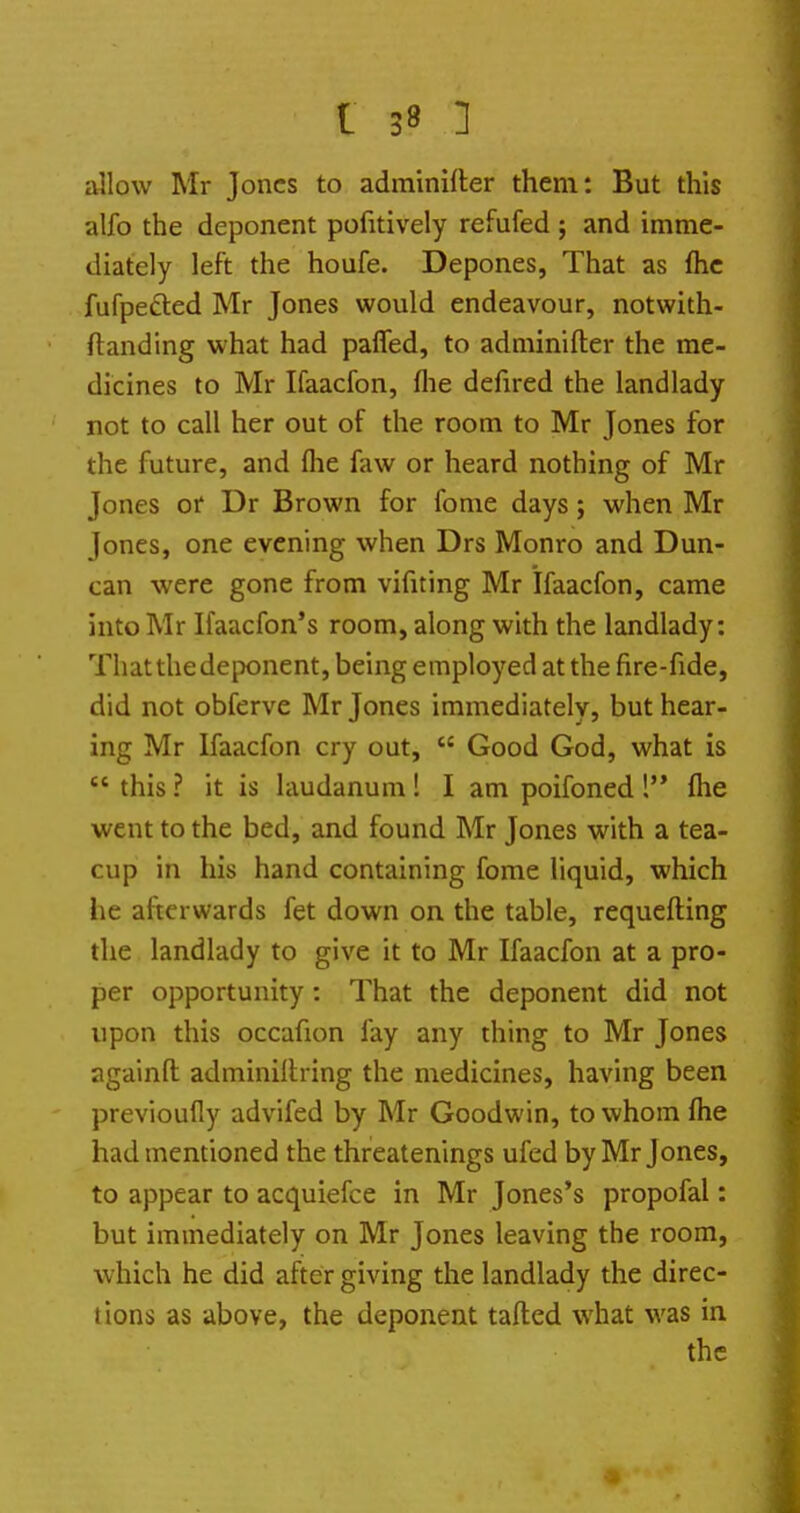 allow Mr Jones to adminifter them: But this alfo the deponent pofitively refufed ; and imme- diately left the houfe. Depones, That as flic fufpedled Mr Jones would endeavour, notwith- ftanding what had paffed, to adminifter the me- dicines to Mr Ifaacfon, flie defired the landlady not to call her out of the room to Mr Jones for the future, and flie faw or heard nothing of Mr Jones or Dr Brown for fome days; when Mr Jones, one evening when Drs Monro and Dun- can were gone from vifiting Mr Ifaacfon, came into Mr Ifaacfon's room, along with the landlady: That the deponent, being employed at the fire-fide, did not obferve Mr Jones immediately, but hear- ing Mr Ifaacfon cry out,  Good God, what is  this ? it is laudanum! I am poifoned 1 flie went to the bed, and found Mr Jones with a tea- cup in his hand containing fome liquid, which he afterwards fet down on the table, requefting the landlady to give it to Mr Ifaacfon at a pro- per opportunity: That the deponent did not upon this occafion fay any thing to Mr Jones againfl adminillring the medicines, having been previoufly advifed by Mr Goodwin, to whom flie had mentioned the threatenings ufed by Mr Jones, to appear to acquiefce in Mr Jones's propofal: but immediately on Mr Jones leaving the room, which he did after giving the landlady the direc- tions as above, the deponent tafted what was in the